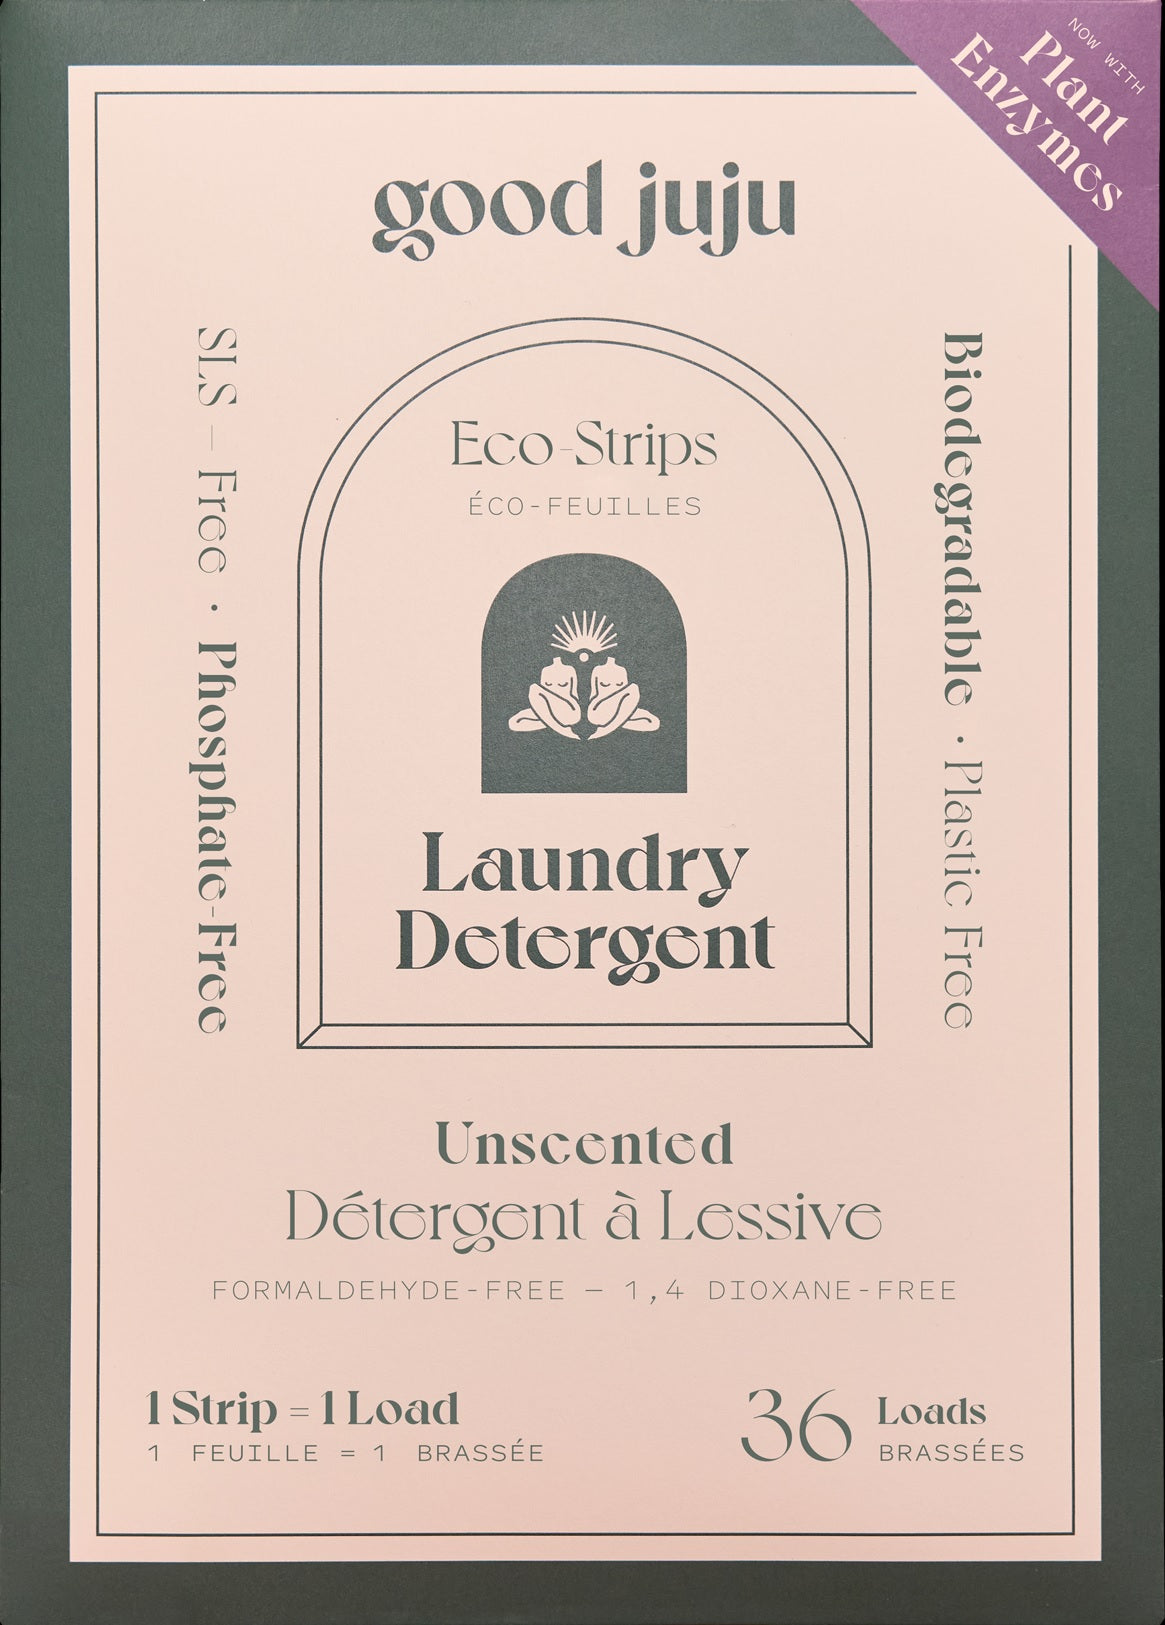 Good Juju - Laundry Detergent Eco-Strips (Unscented)